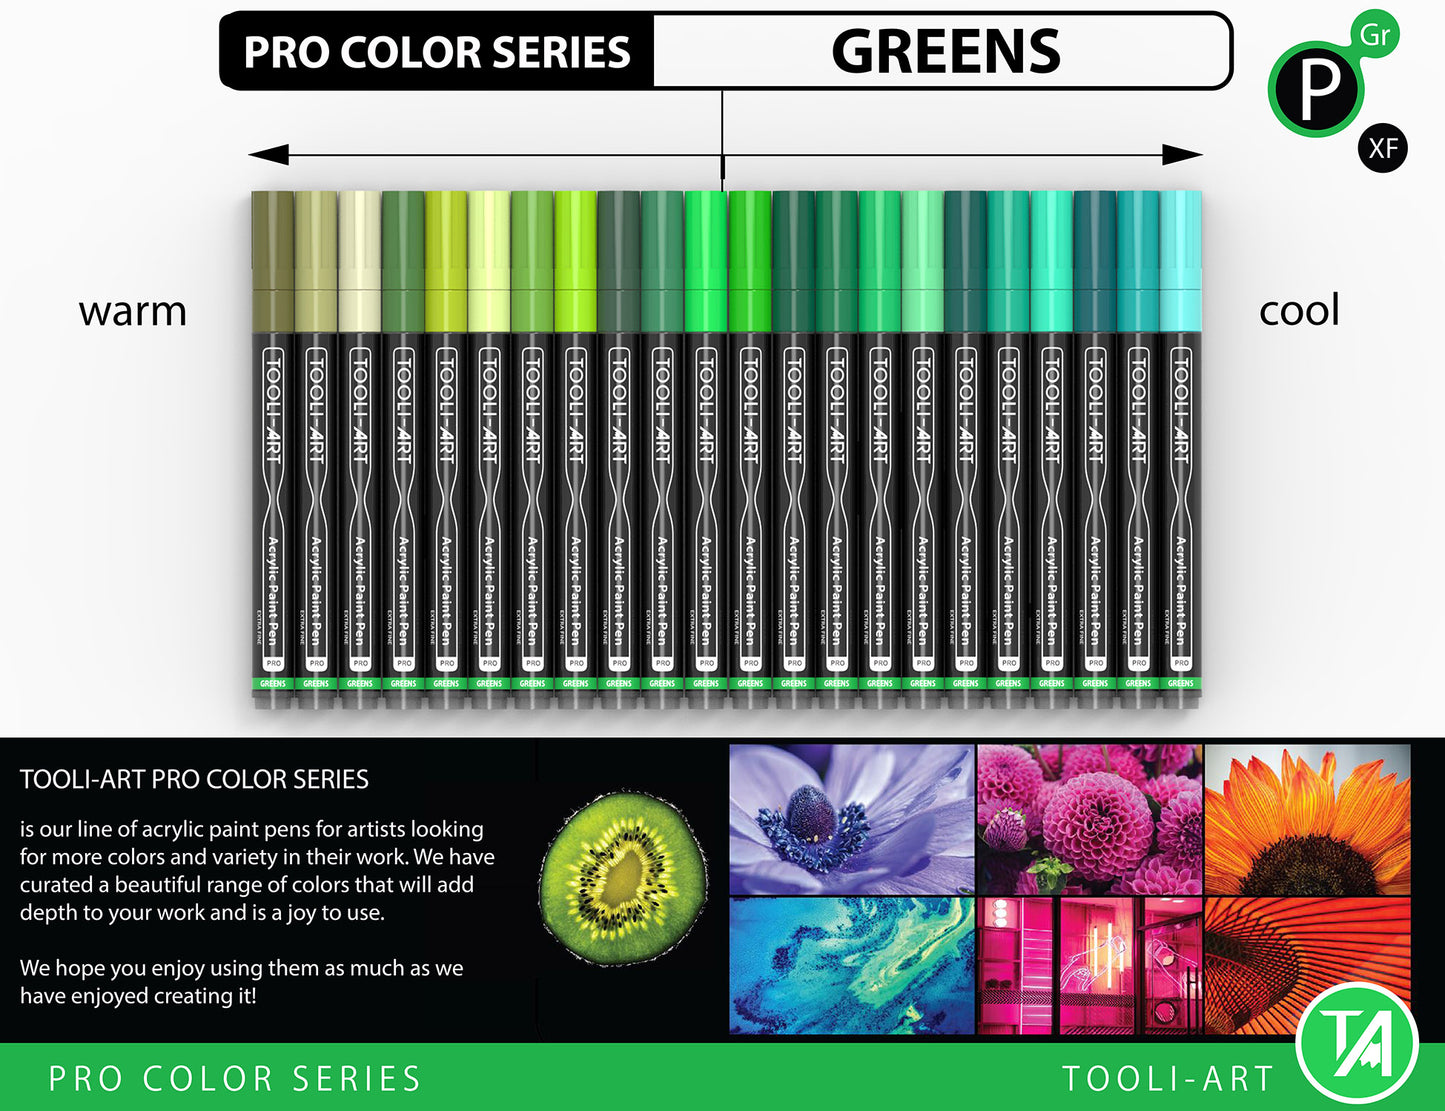 Acrylic Paint Pens 22 Assorted Green Pro Color Series Specialty Markers Set (0.7mm EXTRA FINE)